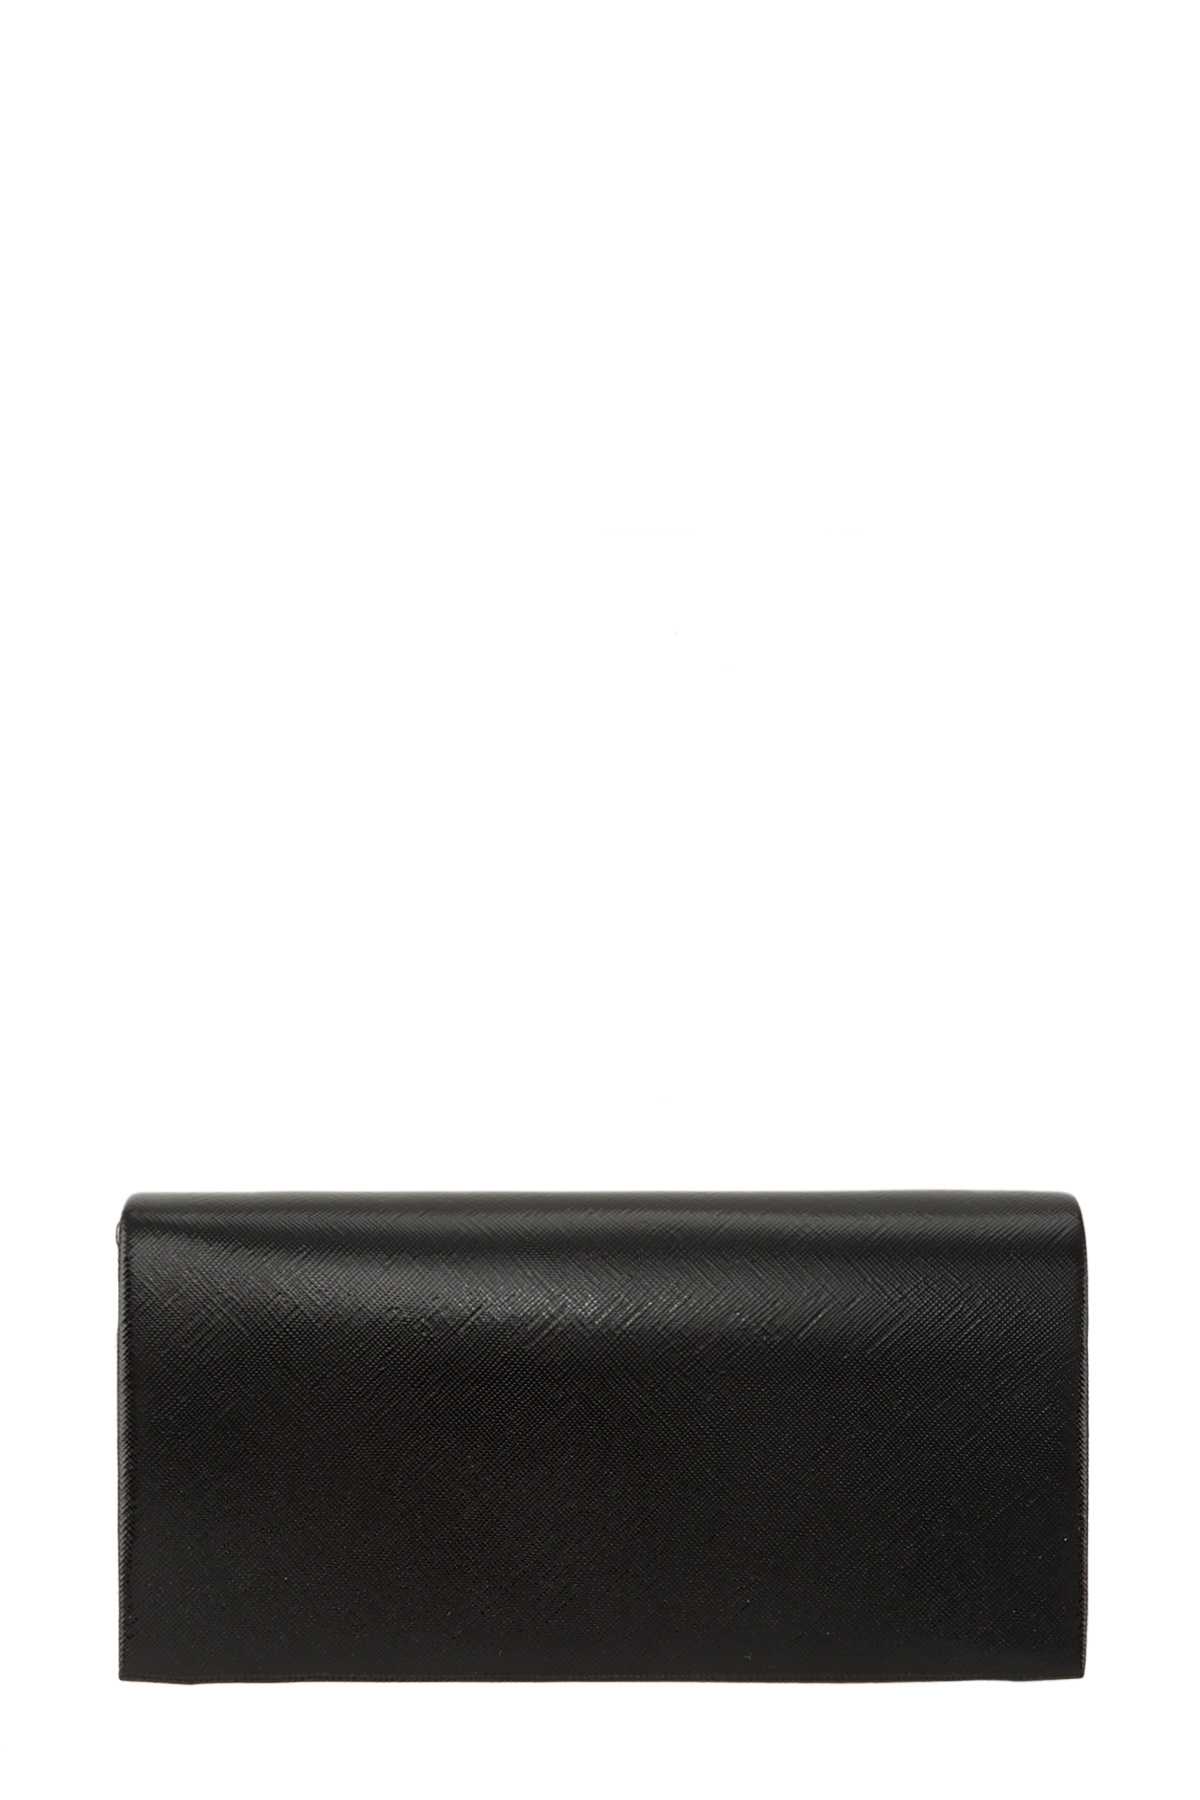 Shining Faux Leather Clutch Bag